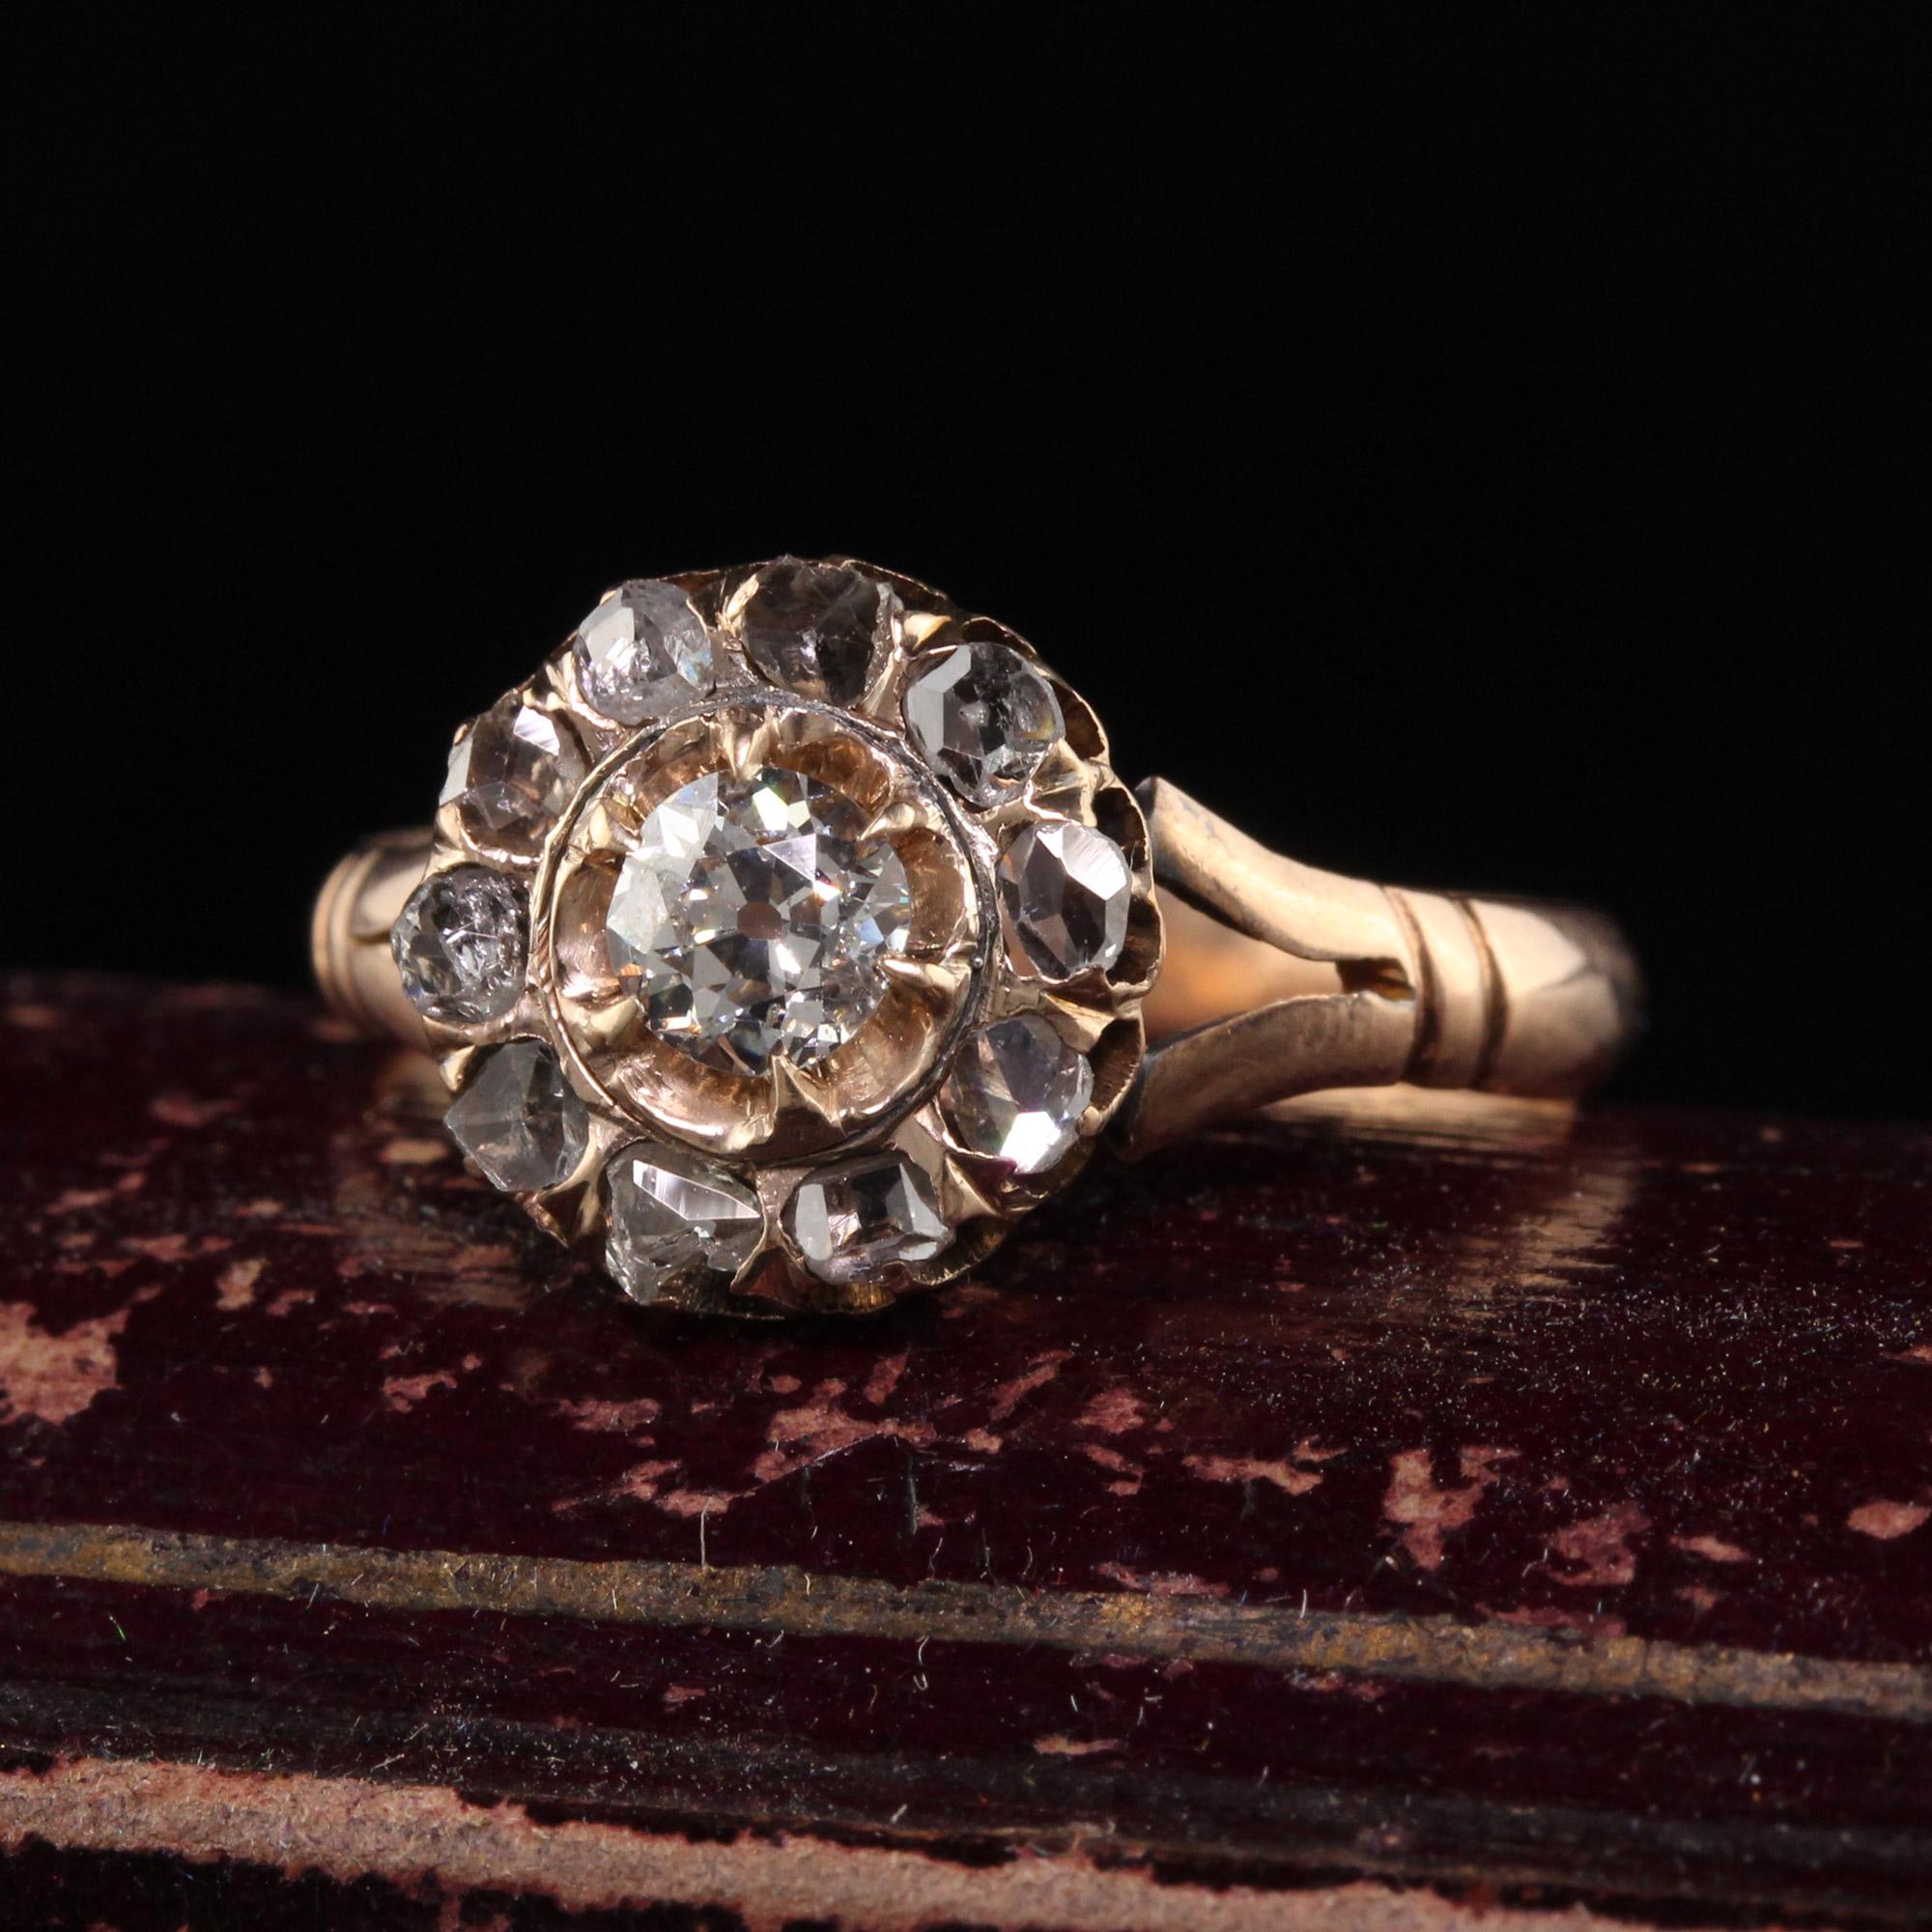 Beautiful Antique Victorian 14K Yellow Gold Old Mine and Rose Cut Diamond Engagement Ring. This gorgeous engagement ring is crafted in 14k yellow gold. The center holds an old mine cut diamond and is surrounded by rose cut diamonds. The bottom of